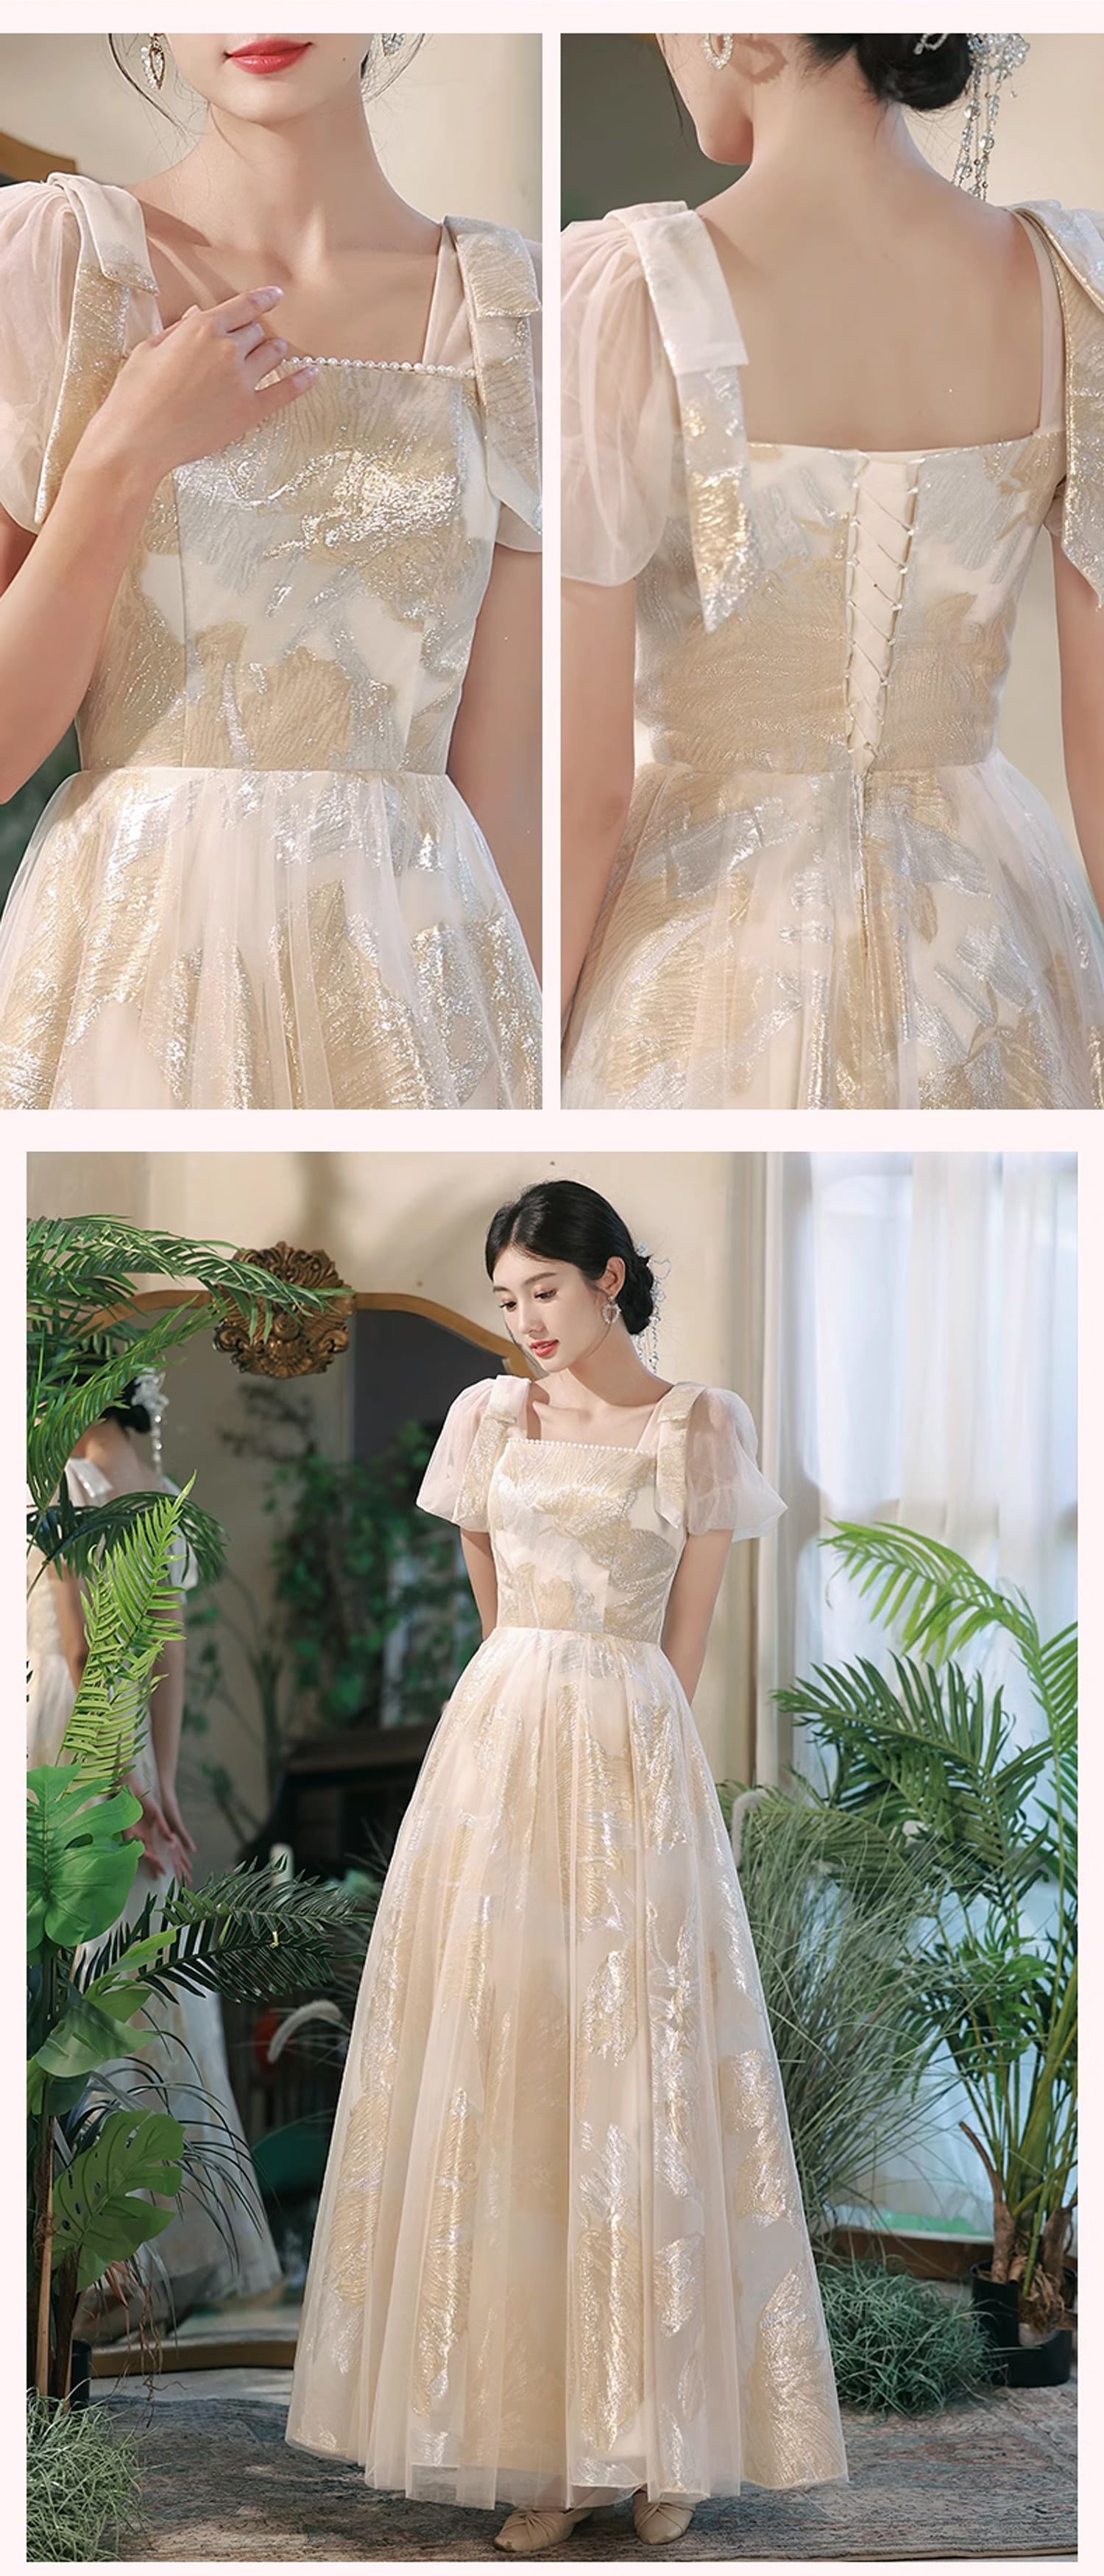 Sweet-French-Style-Bridesmaid-Dress-Party-Gown-with-Short-Sleeves16